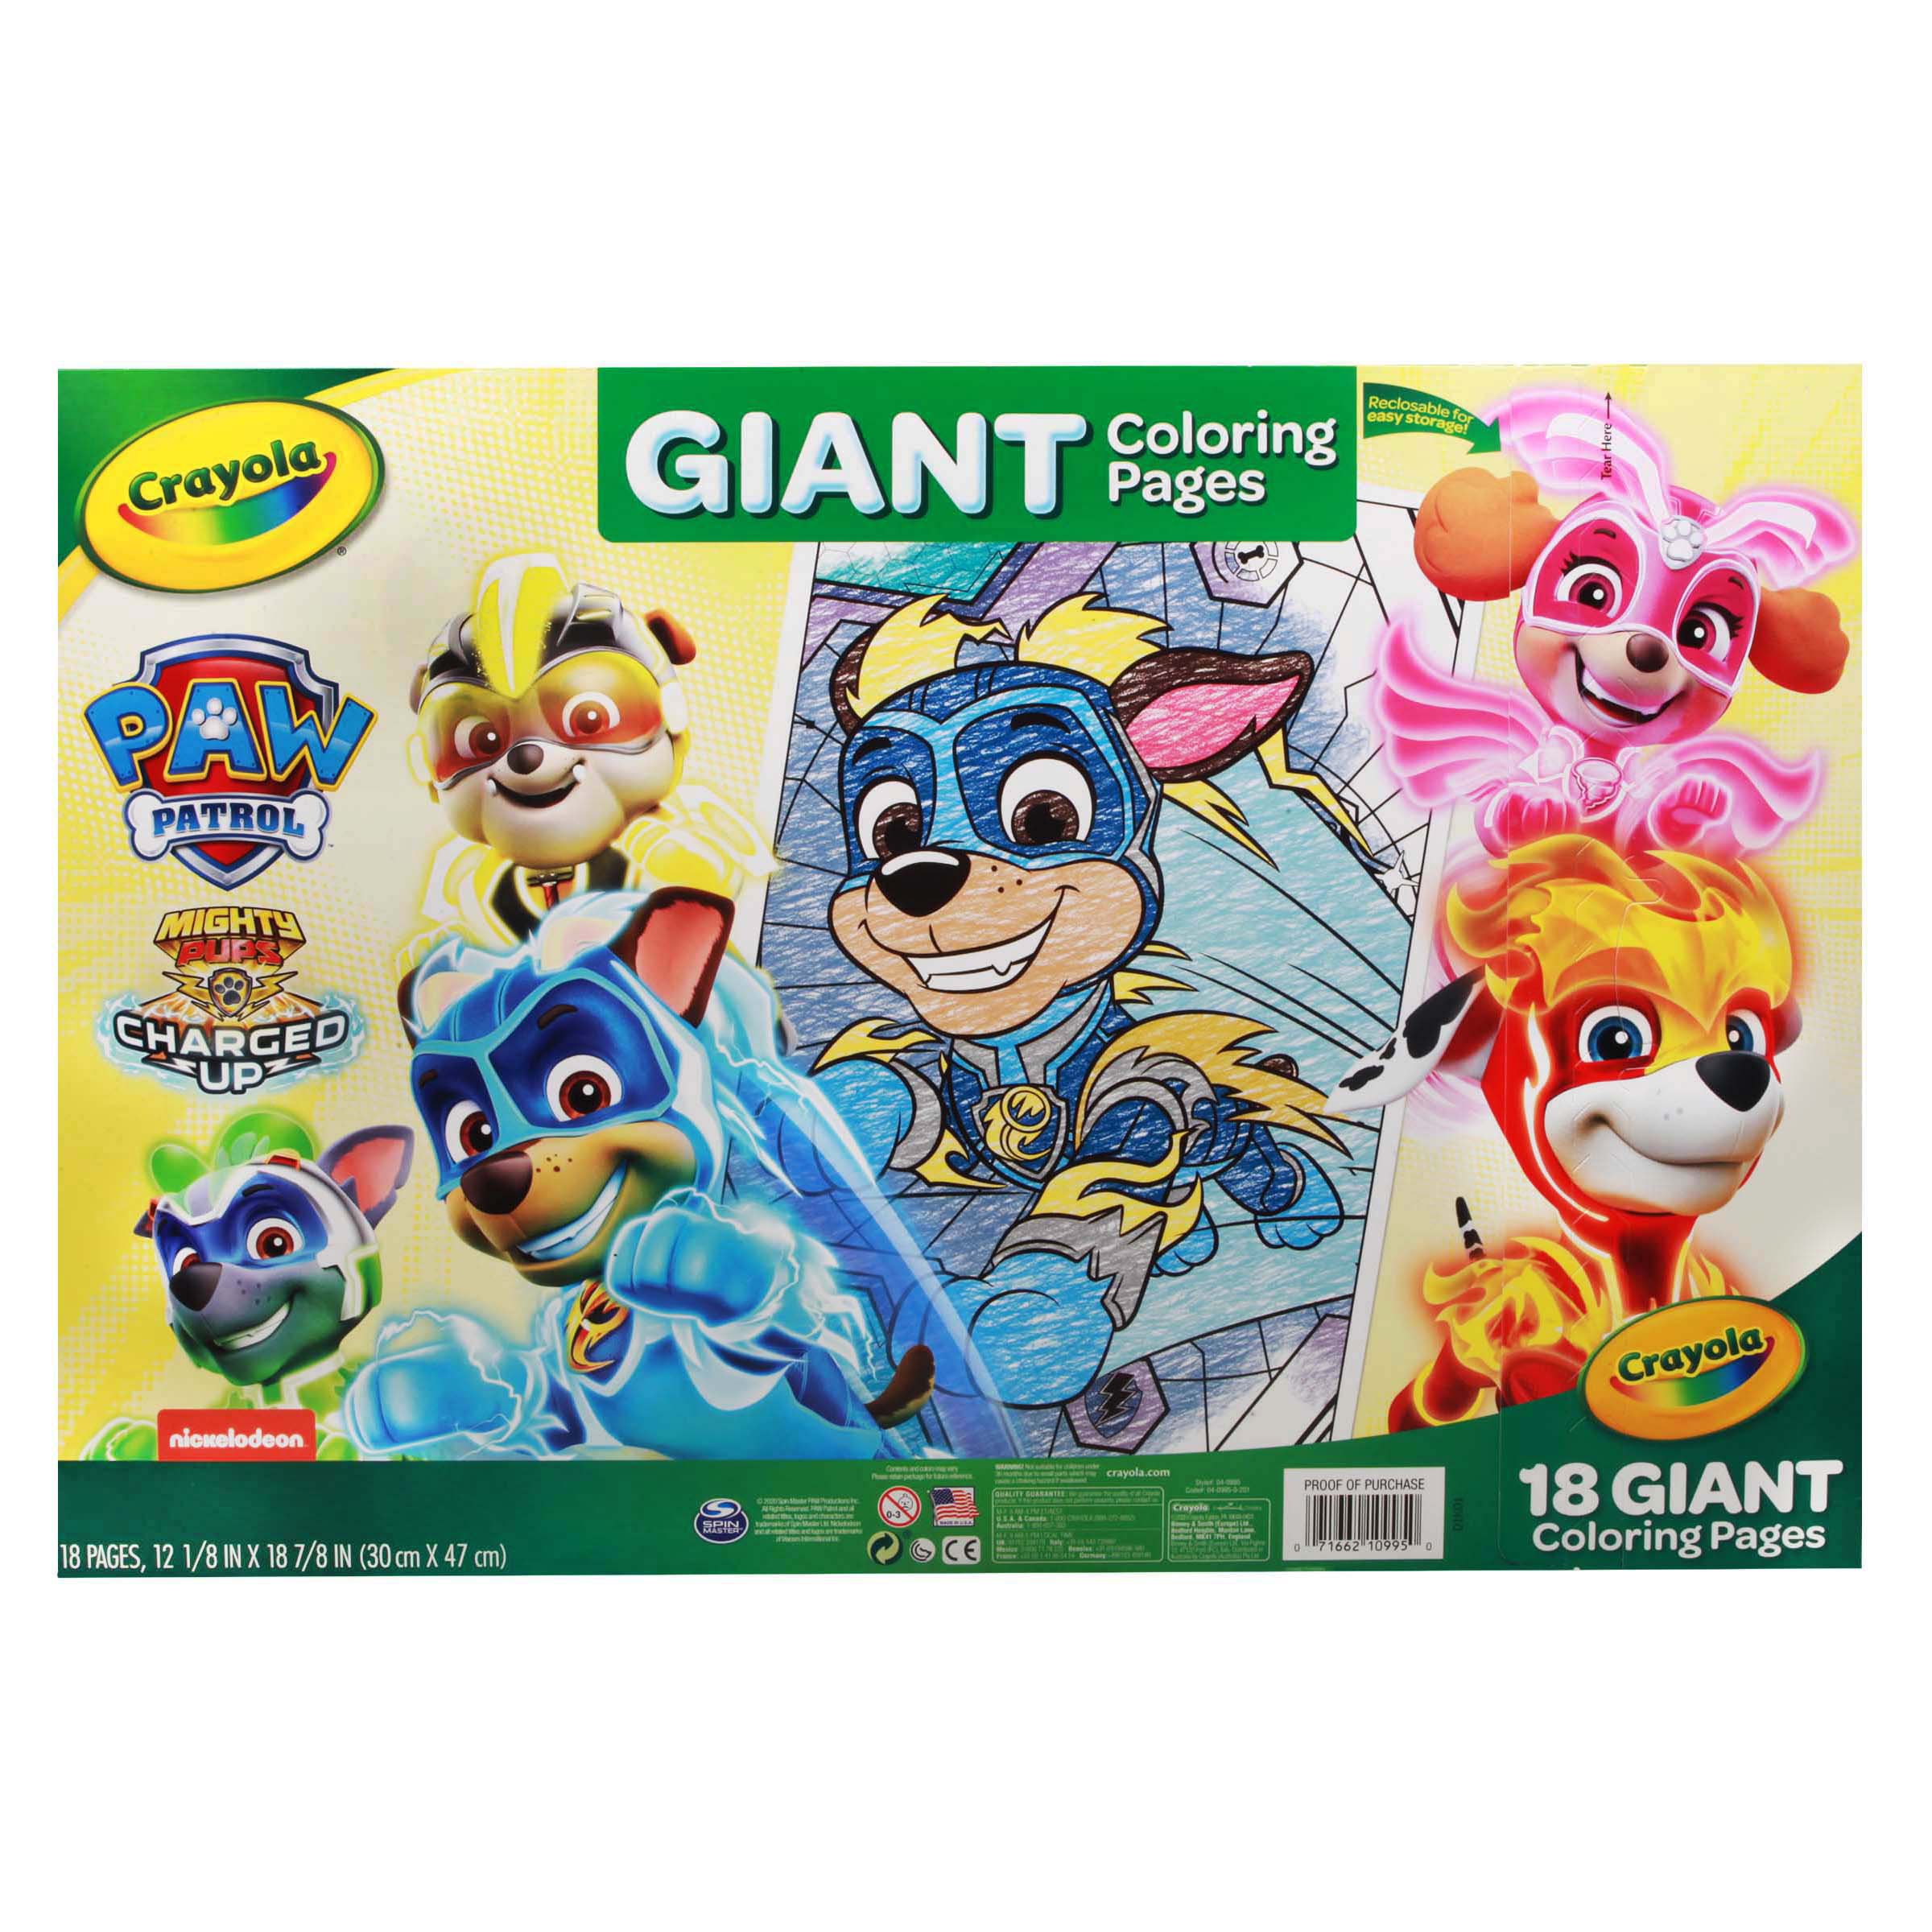 Crayola Giant Coloring Pages – Paw Patrol - Shop Books & Coloring at H-E-B